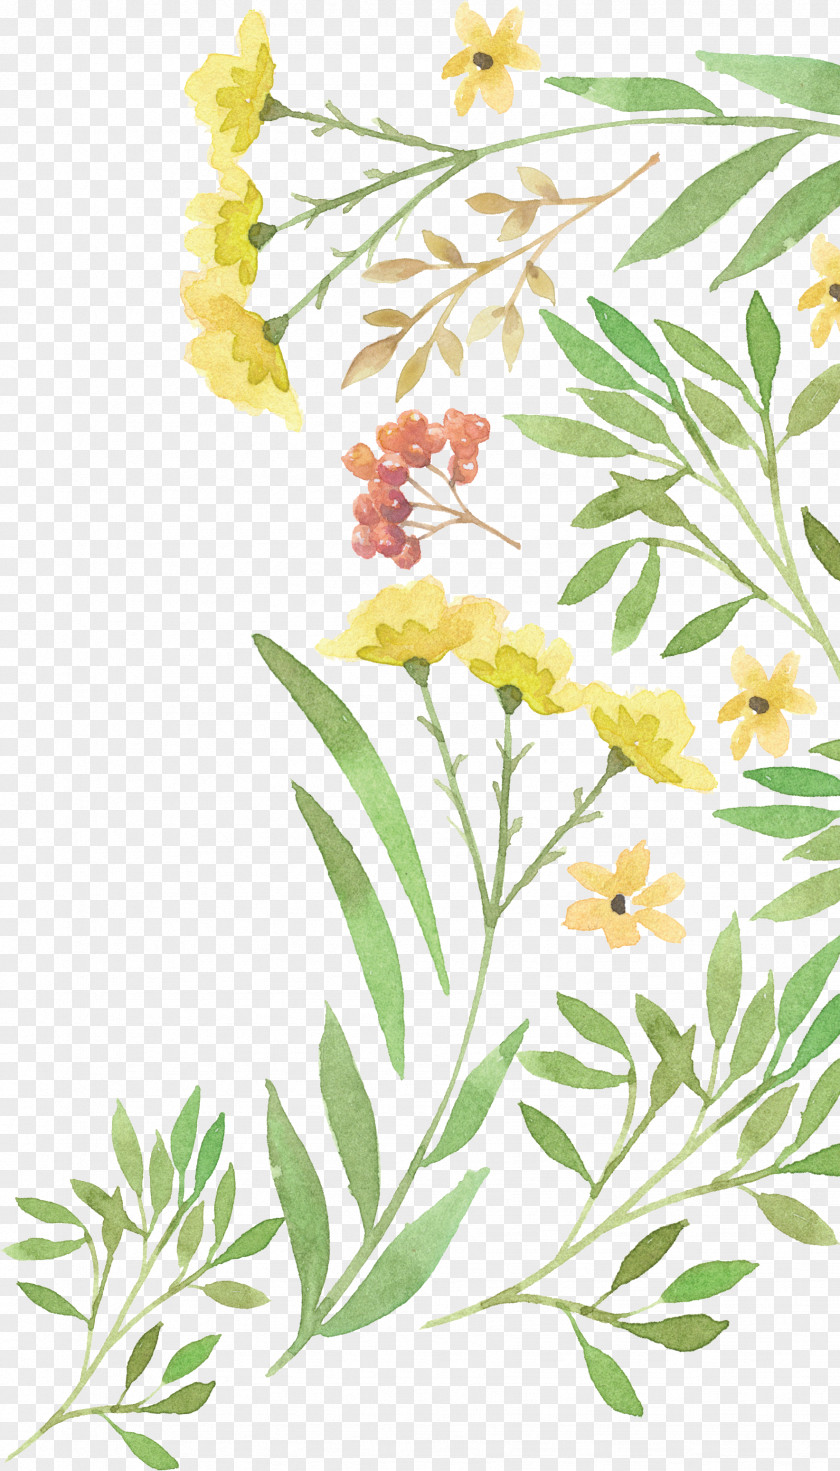 Wedding Invitation Flower Watercolor Painting PNG invitation painting , Floral decoration, yellow petaled flowers illustration clipart PNG